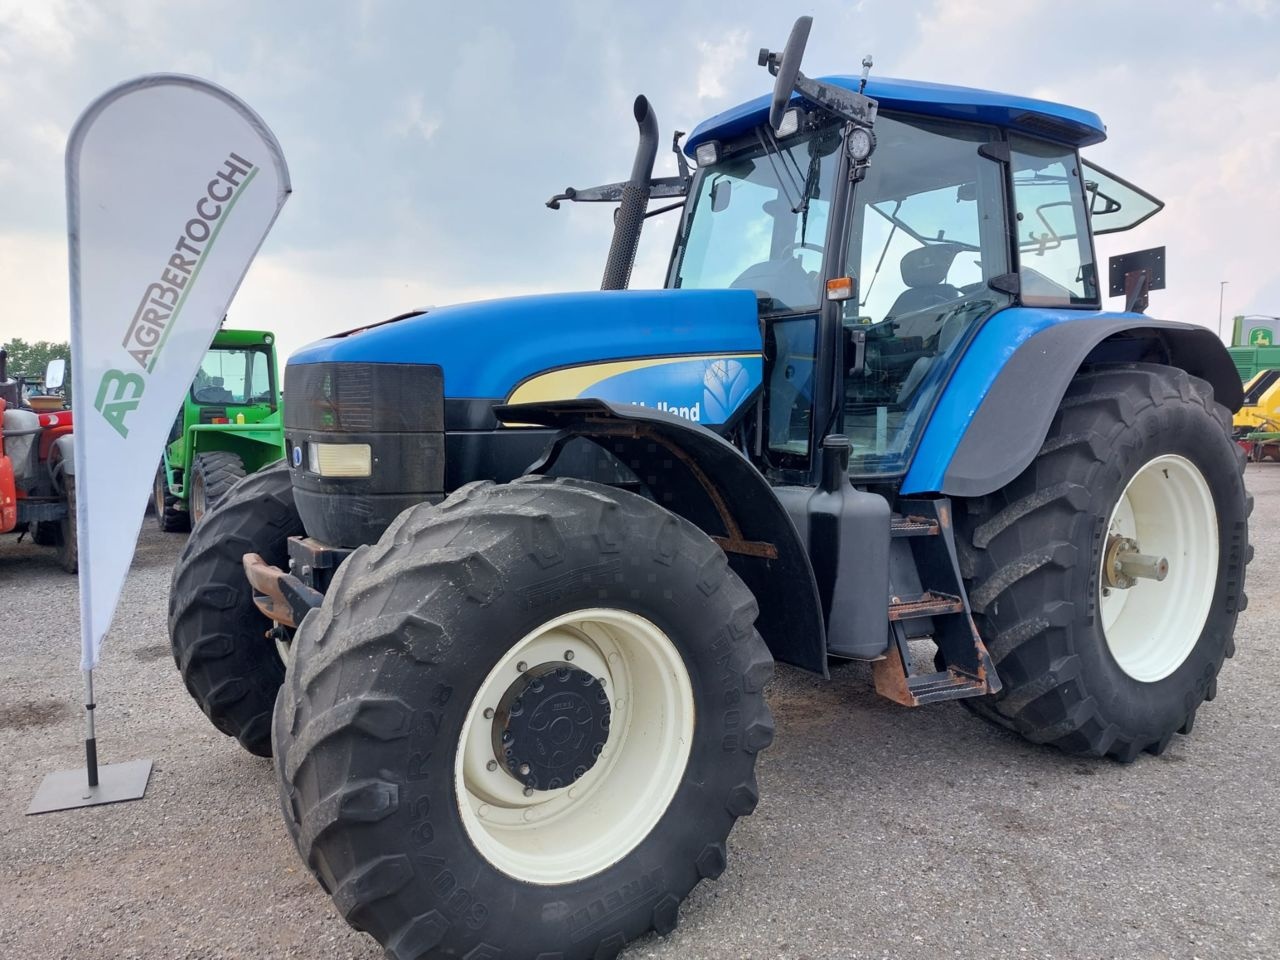 New Holland TM 190 tractor 22 000 €